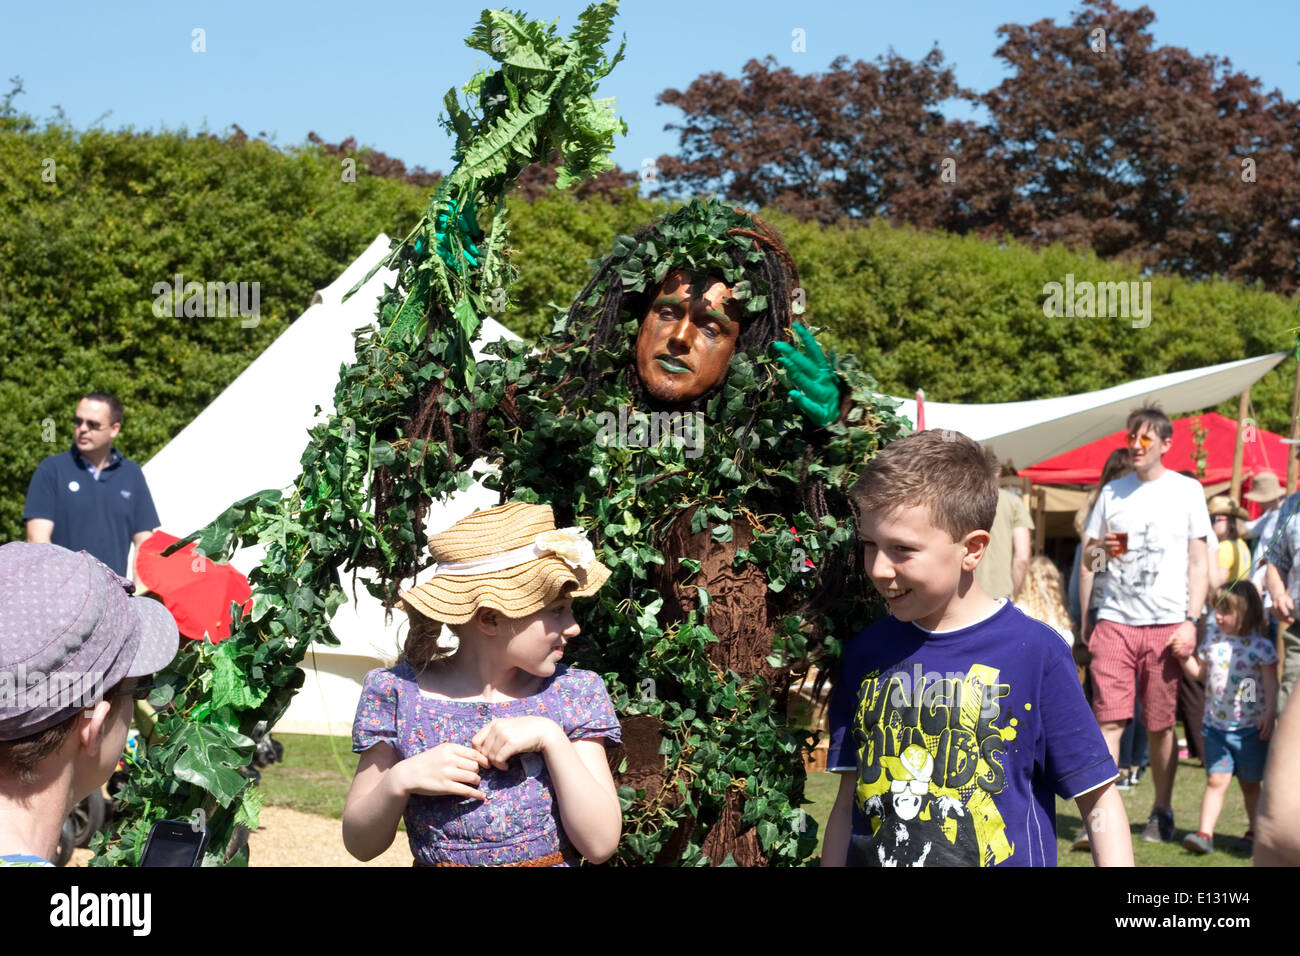 Man dressed as a tree interacts with happy young children Stock Photo